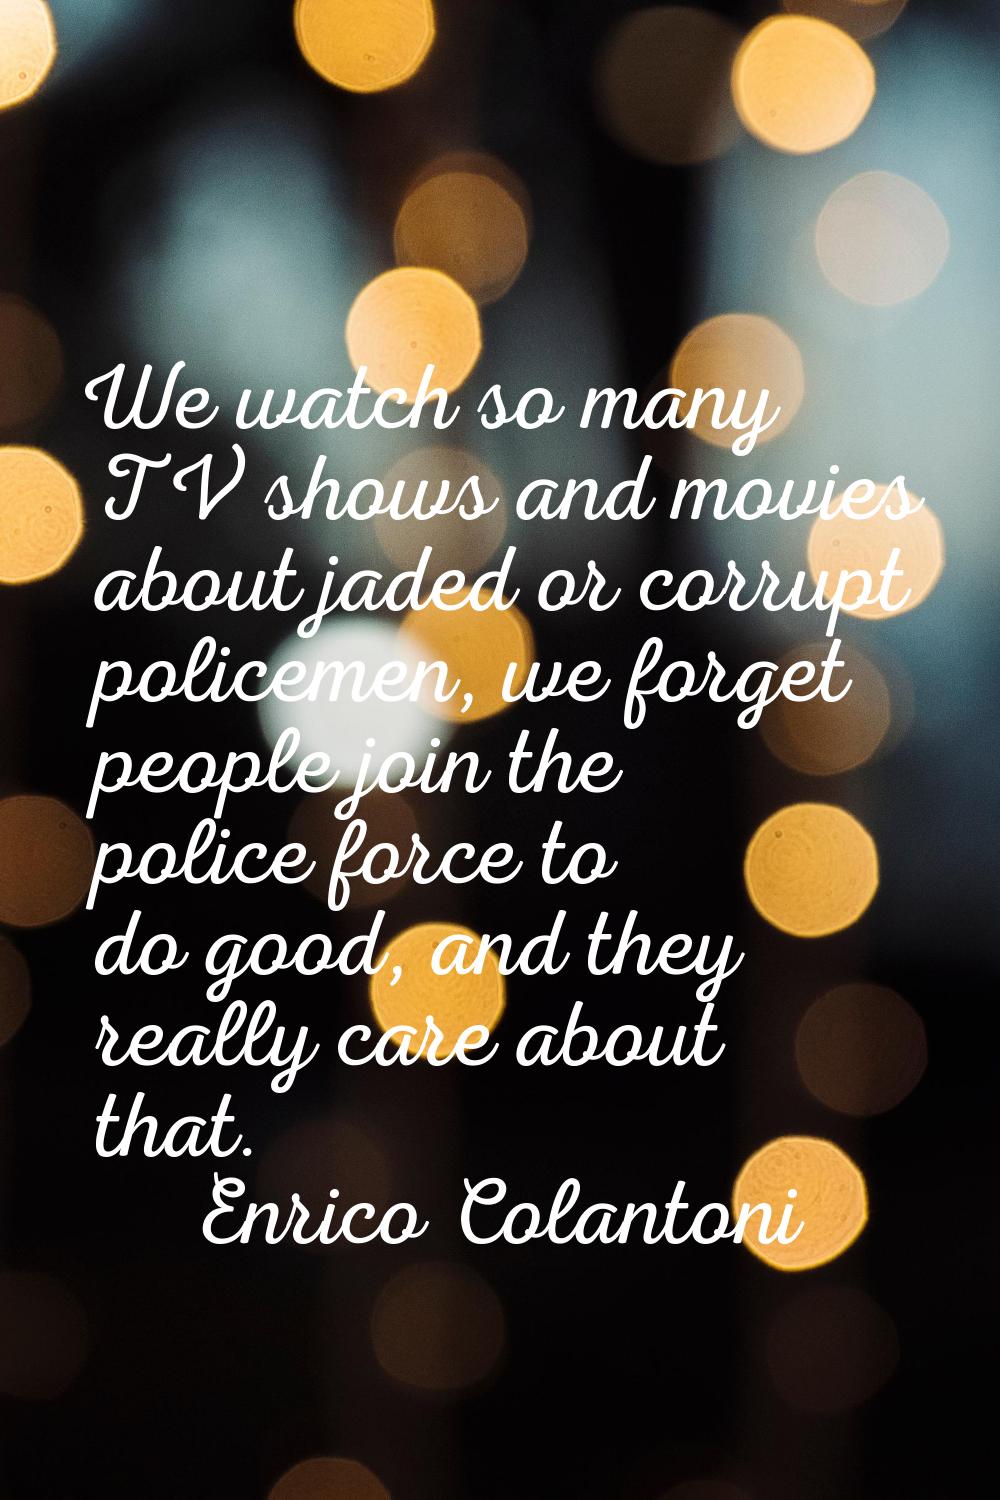 We watch so many TV shows and movies about jaded or corrupt policemen, we forget people join the po